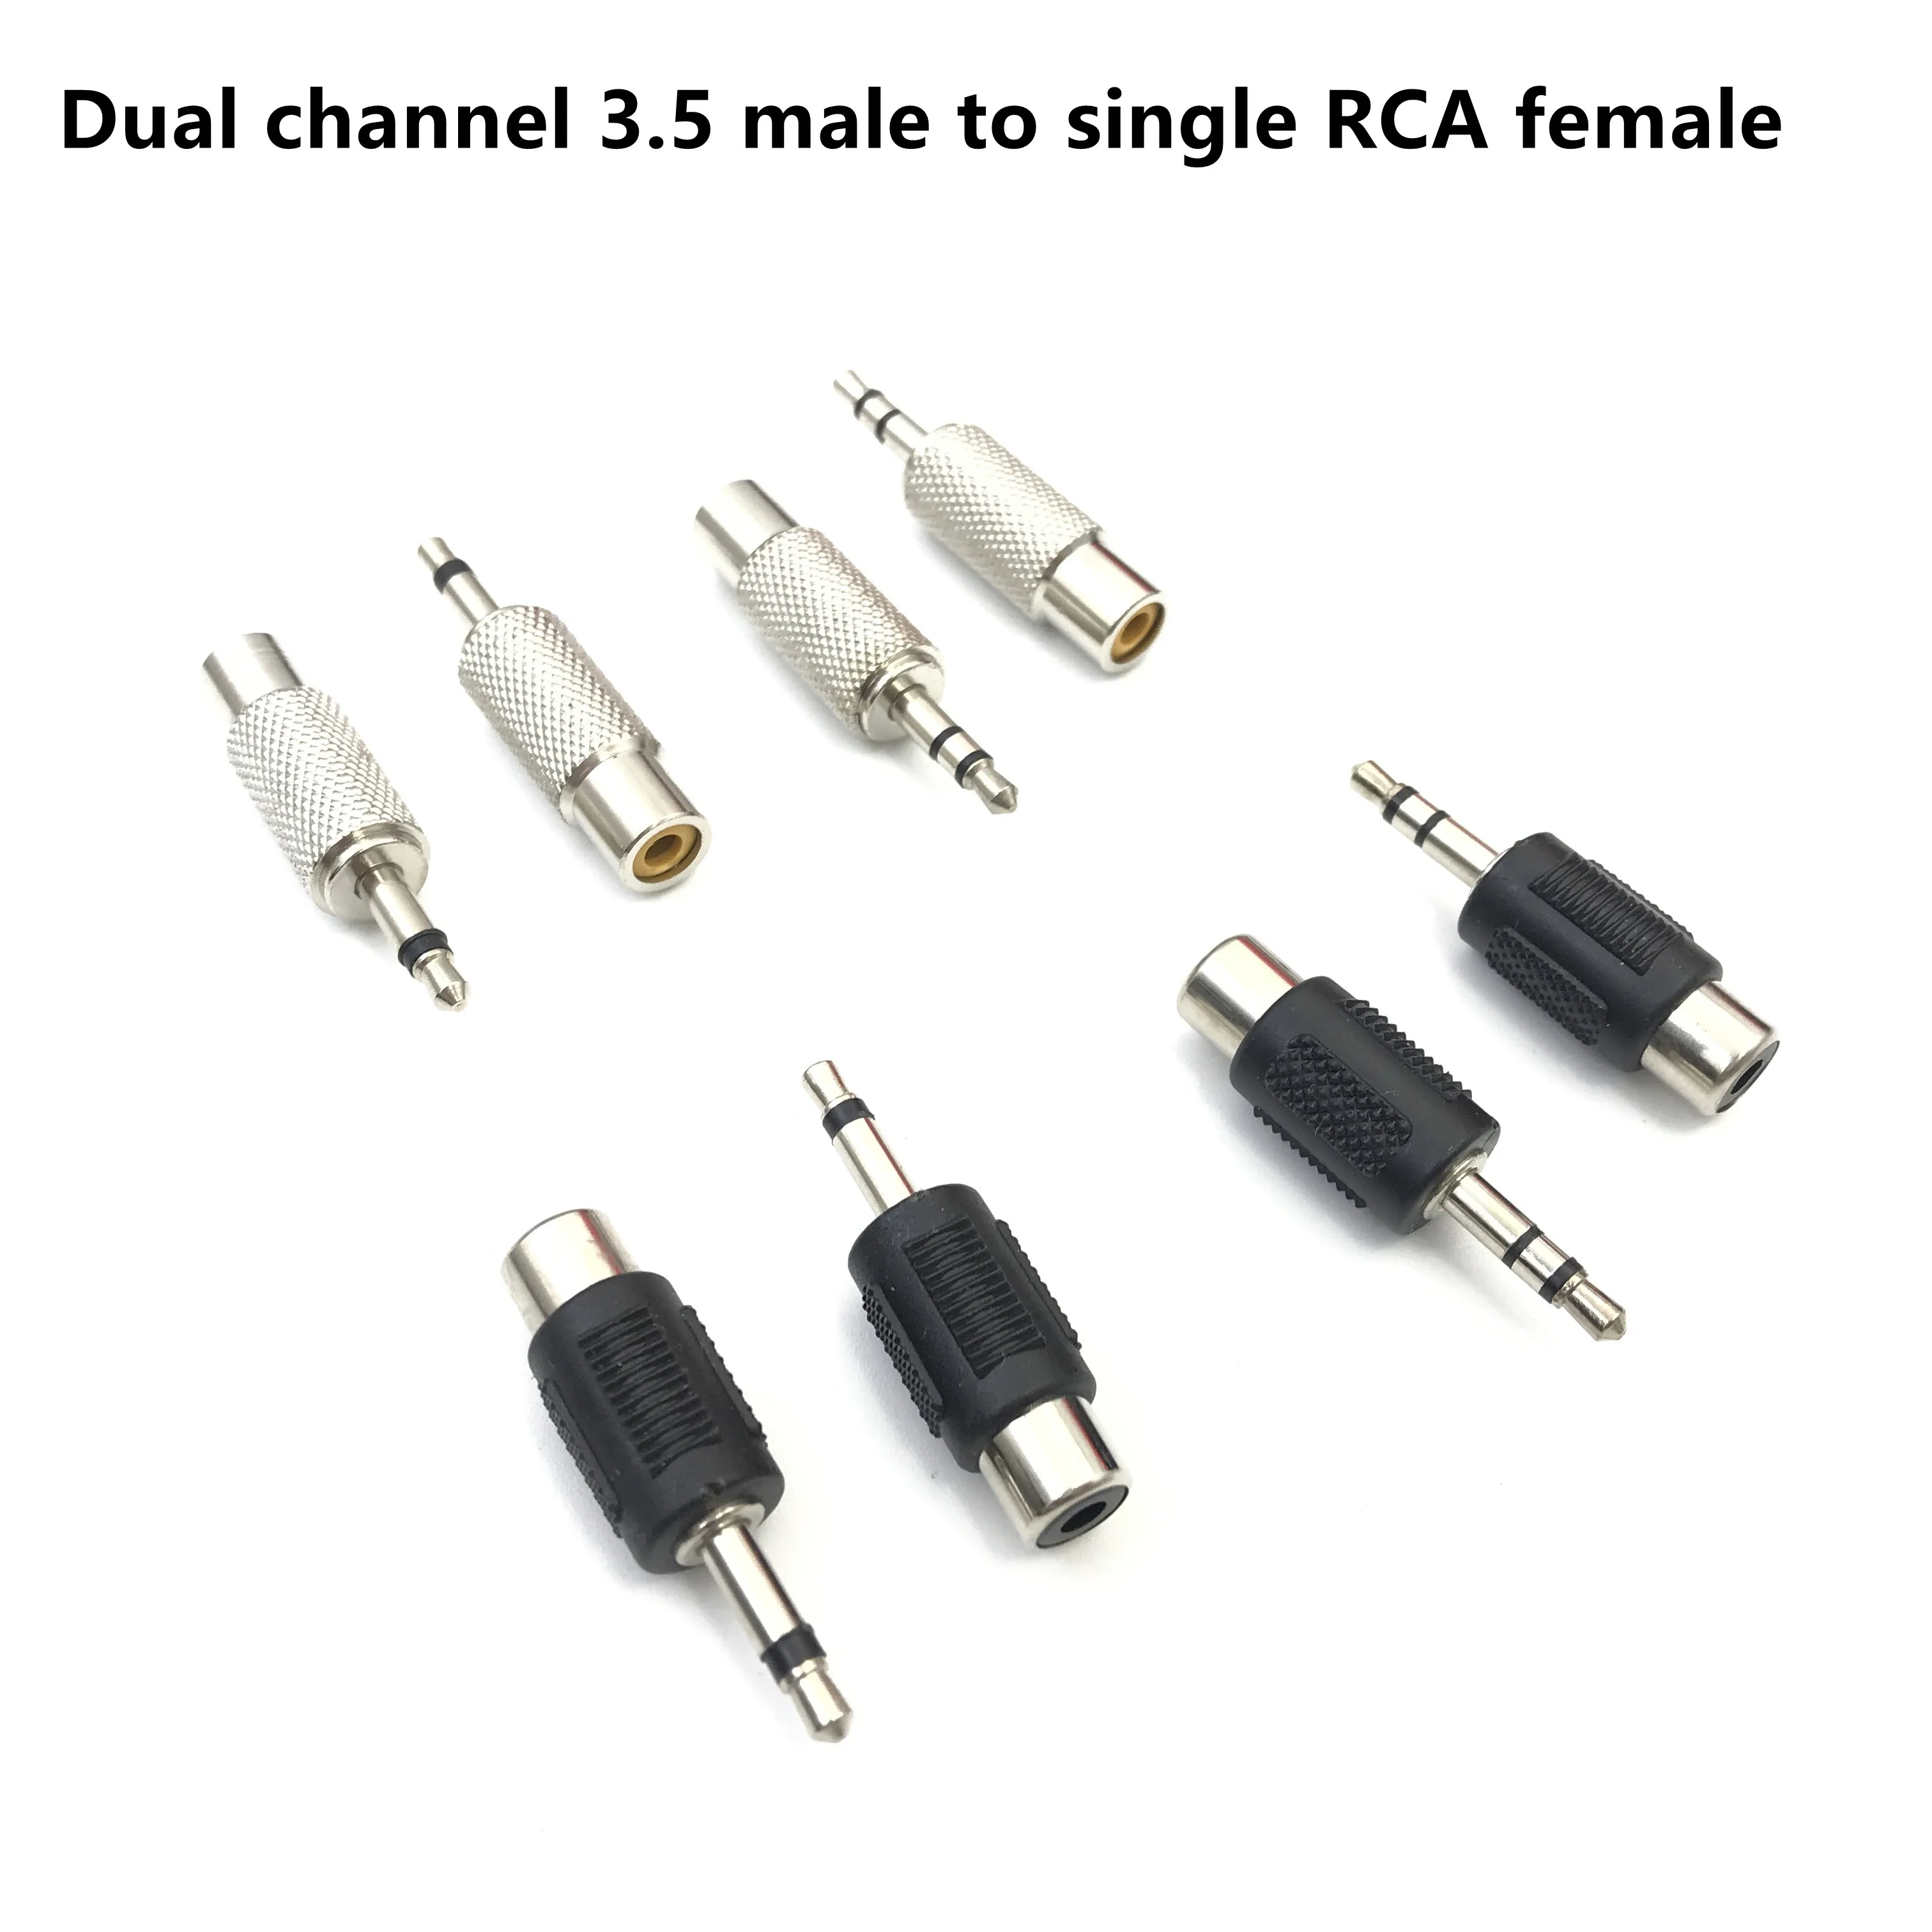 Dual channel 3.5 male to single RCA female audio conversion socket 3.5mm male to Lotus female AV metal adapter